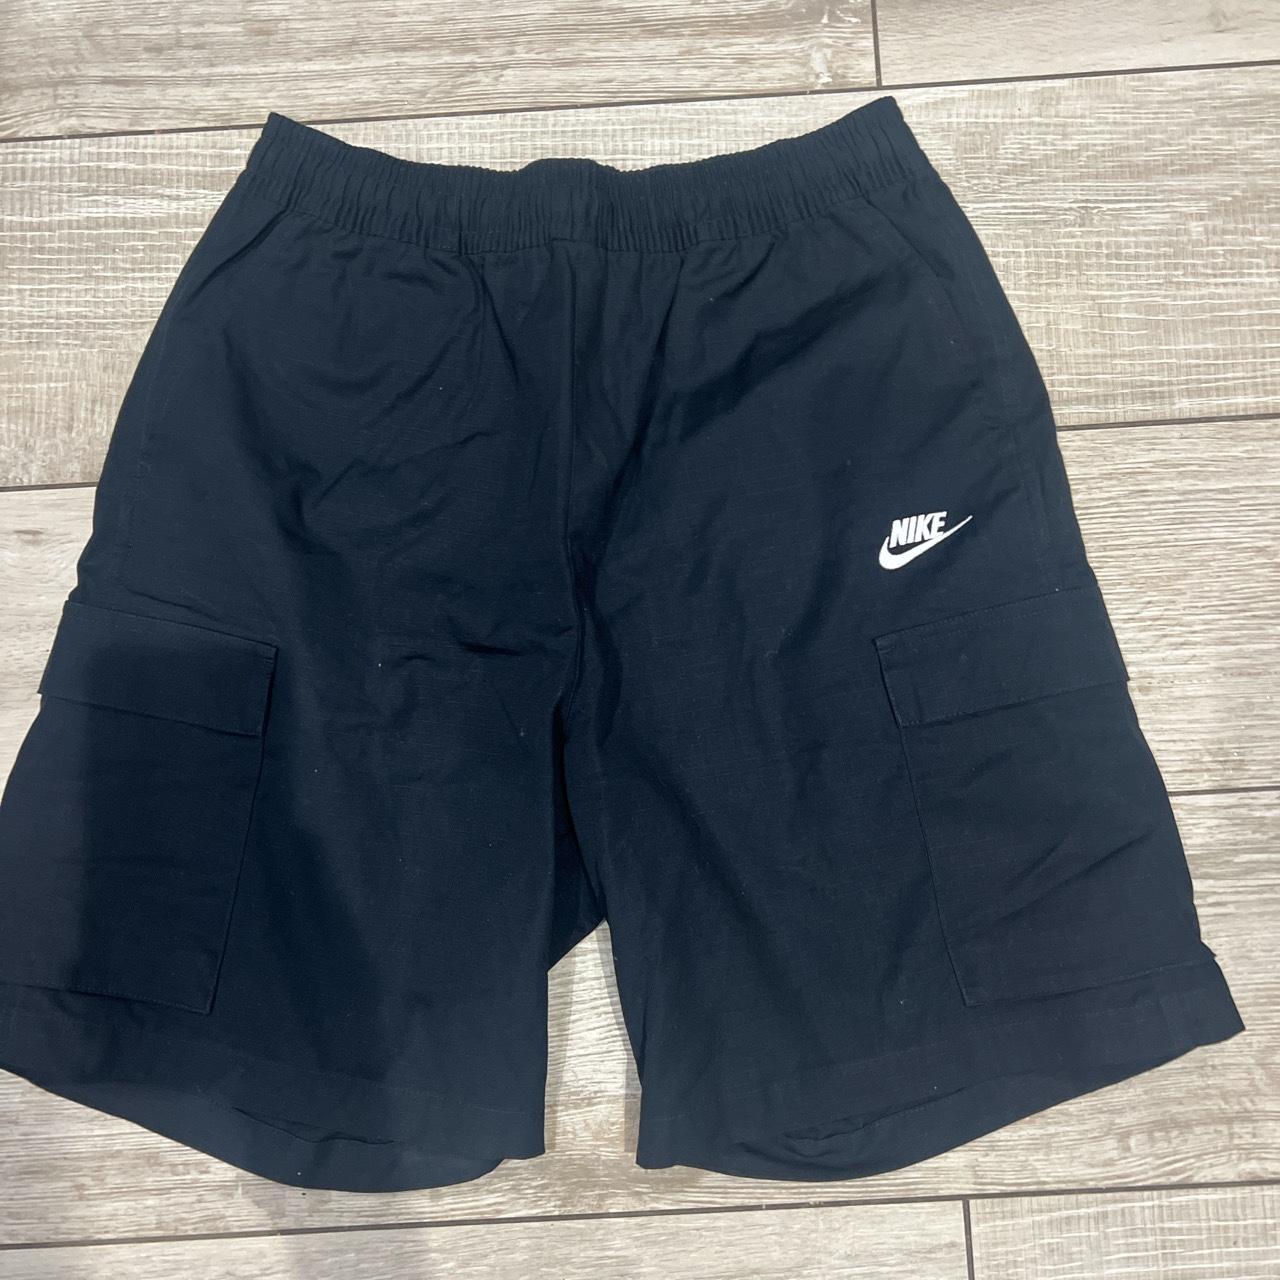 Nike cargo shorts never ever worn just taken tags off - Depop